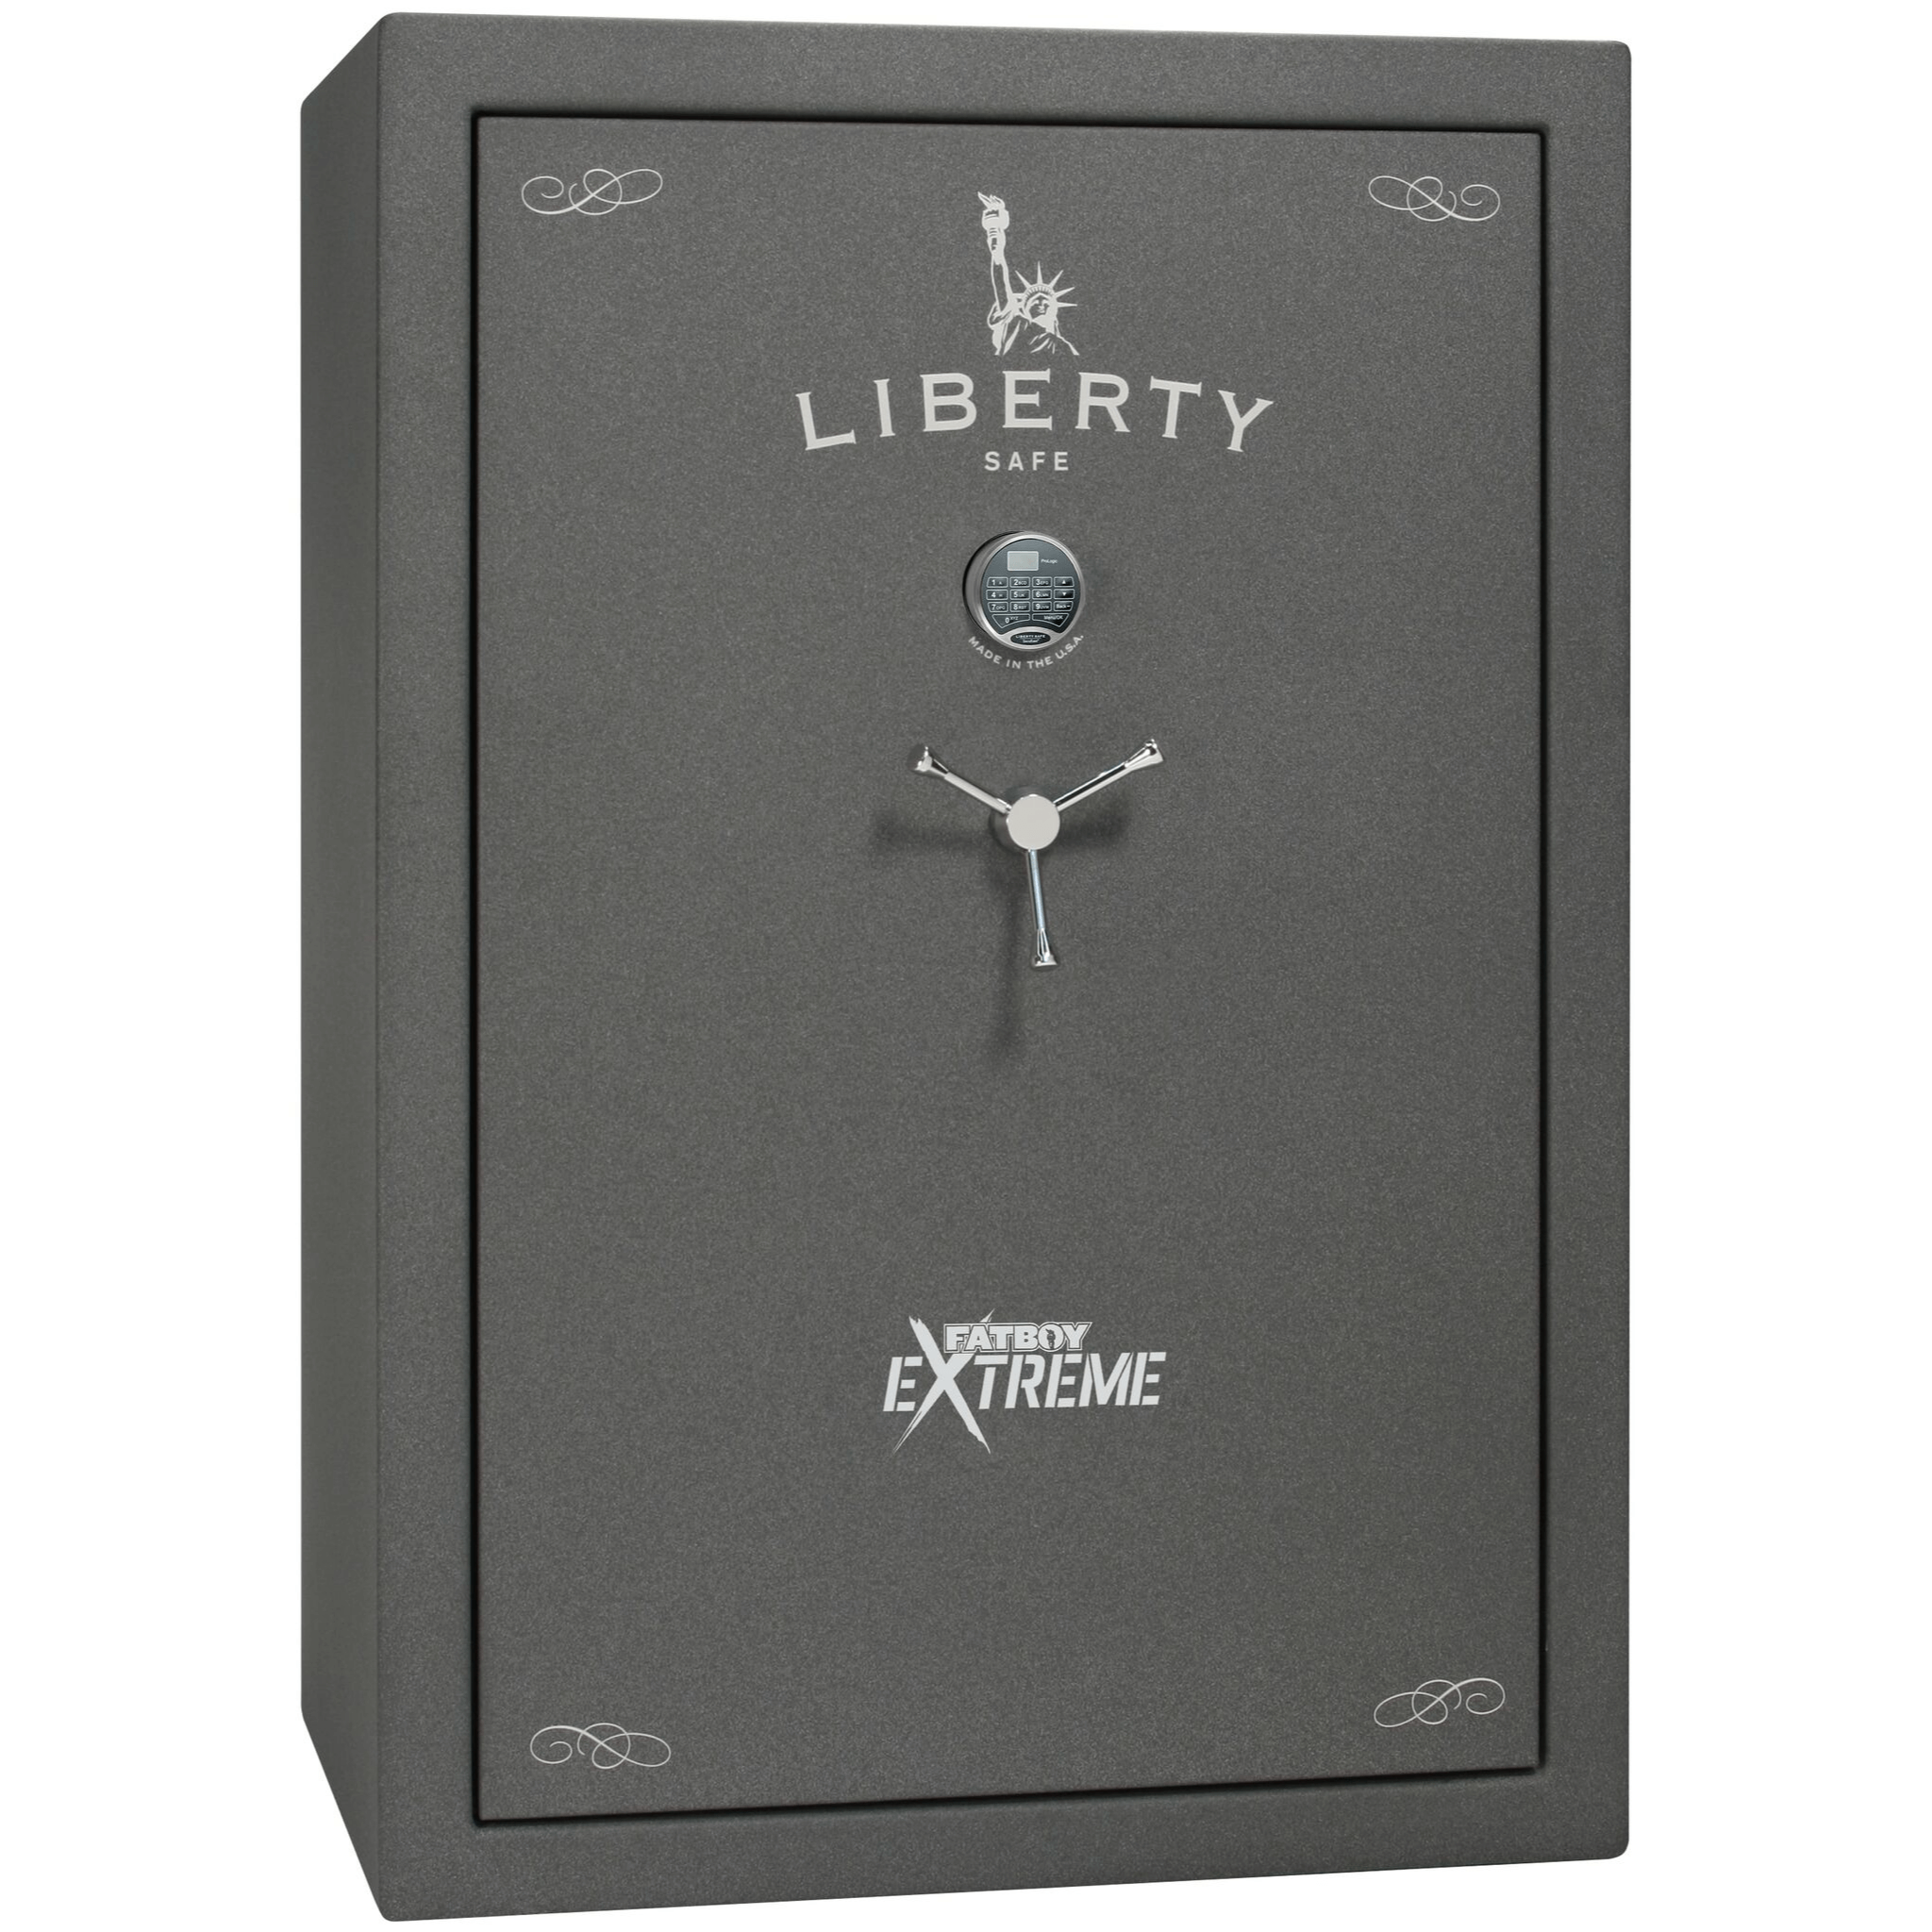 Fatboy Series | 64XT | Level 5 Security | 110 Minute Fire Protection | Dimensions: 60.5"(H) x 42"(W) x 27.5"(D) | Up to 60 Long Guns | Granite Textured | Electronic Lock